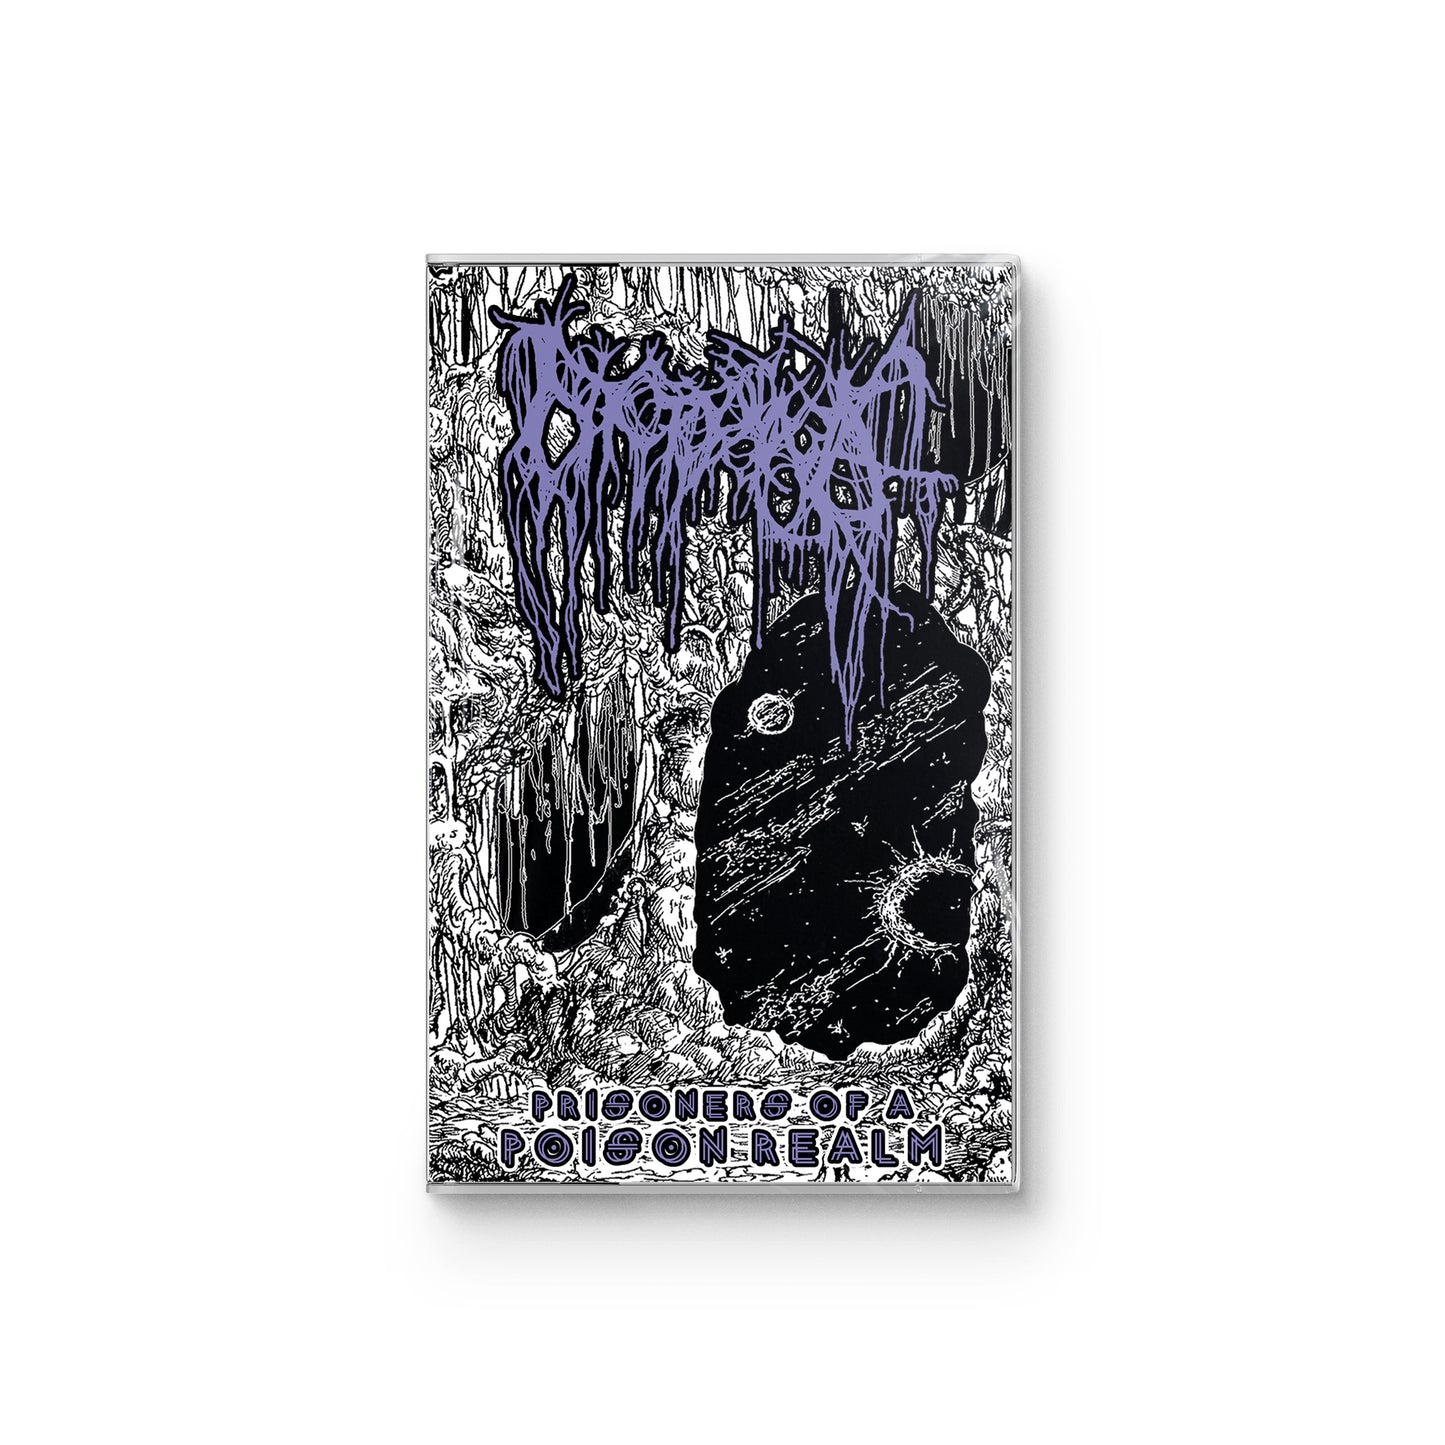 Nyctophagia "Prisoners Of A Poison Realm" CASSETTE PRE-ORDER